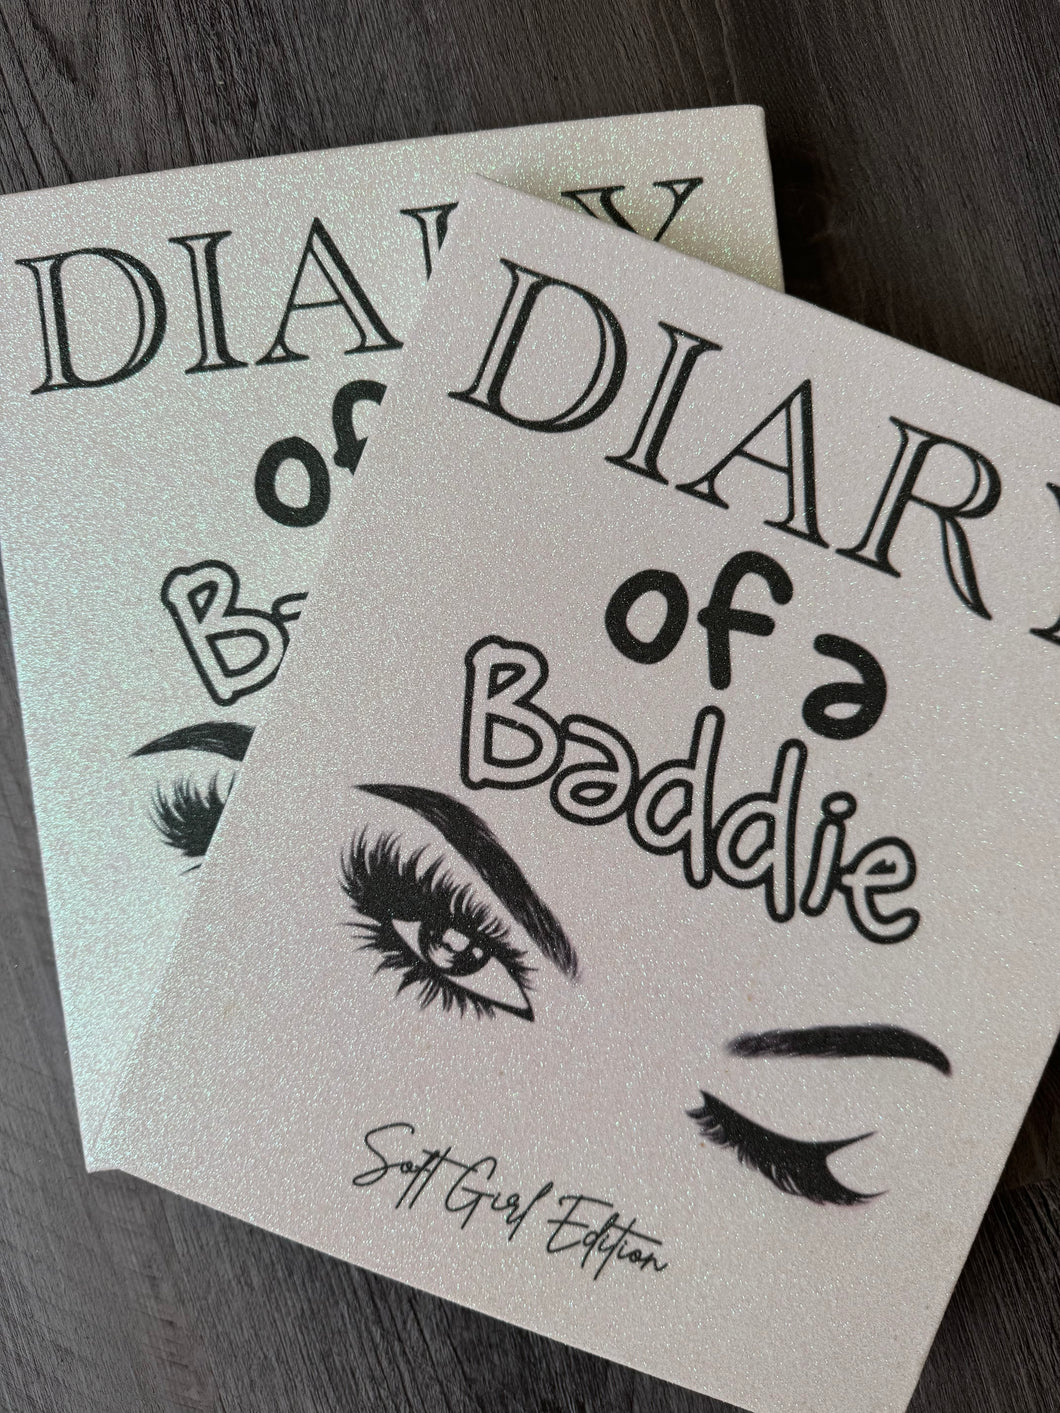 Diary of a Baddie Lashbook - Soft Girl Edition